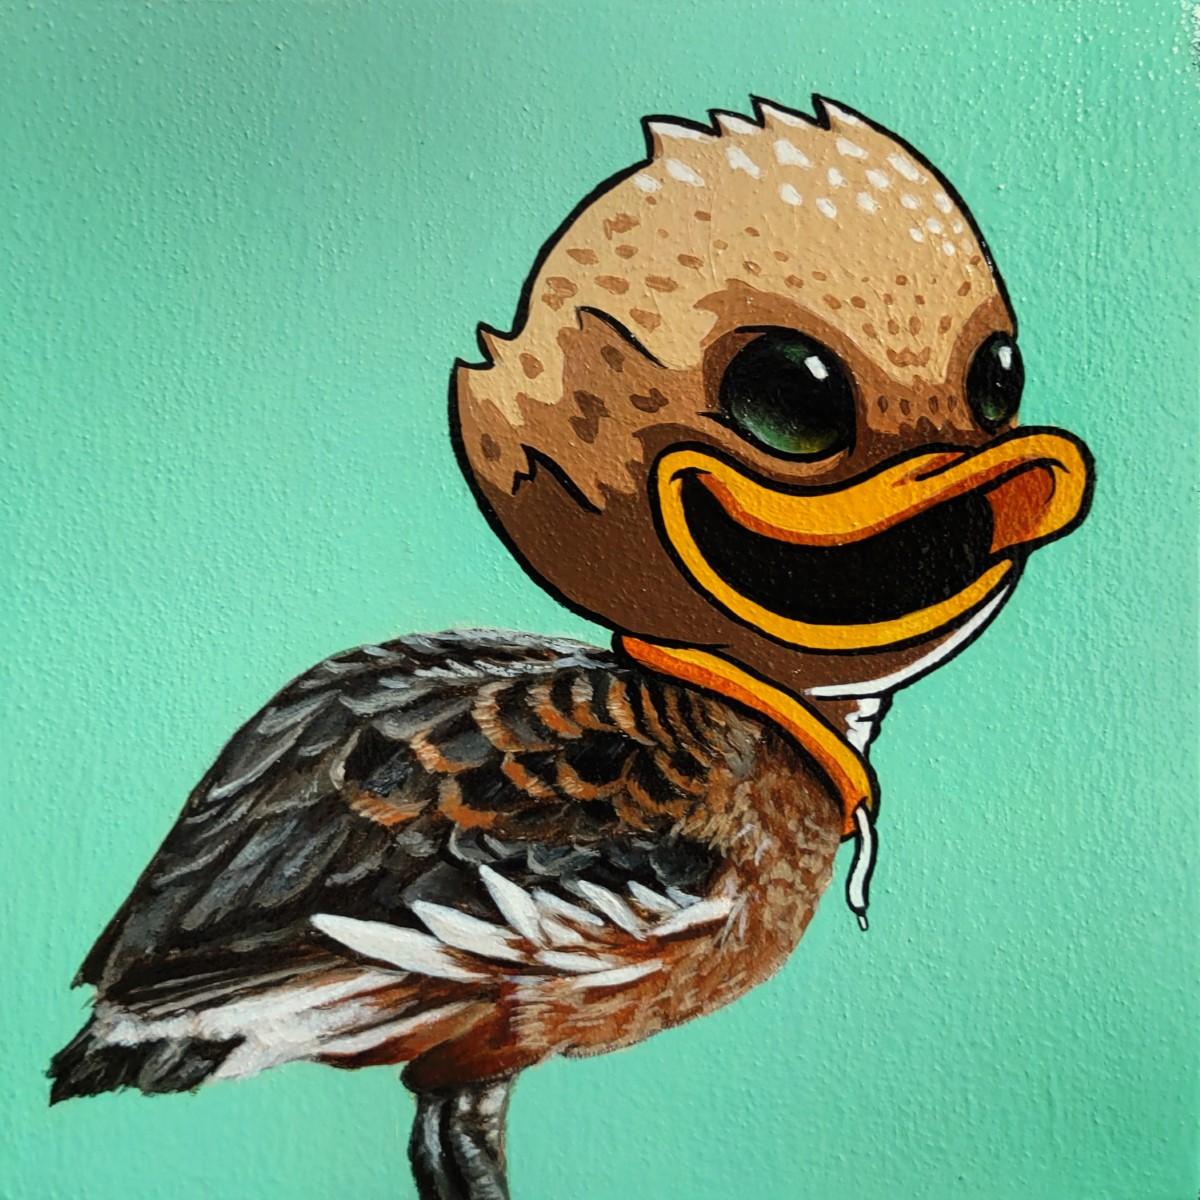 3rd Version (Ben Patterson) Animal Painting - "Ducky", Cartoon Duck Oil Painting